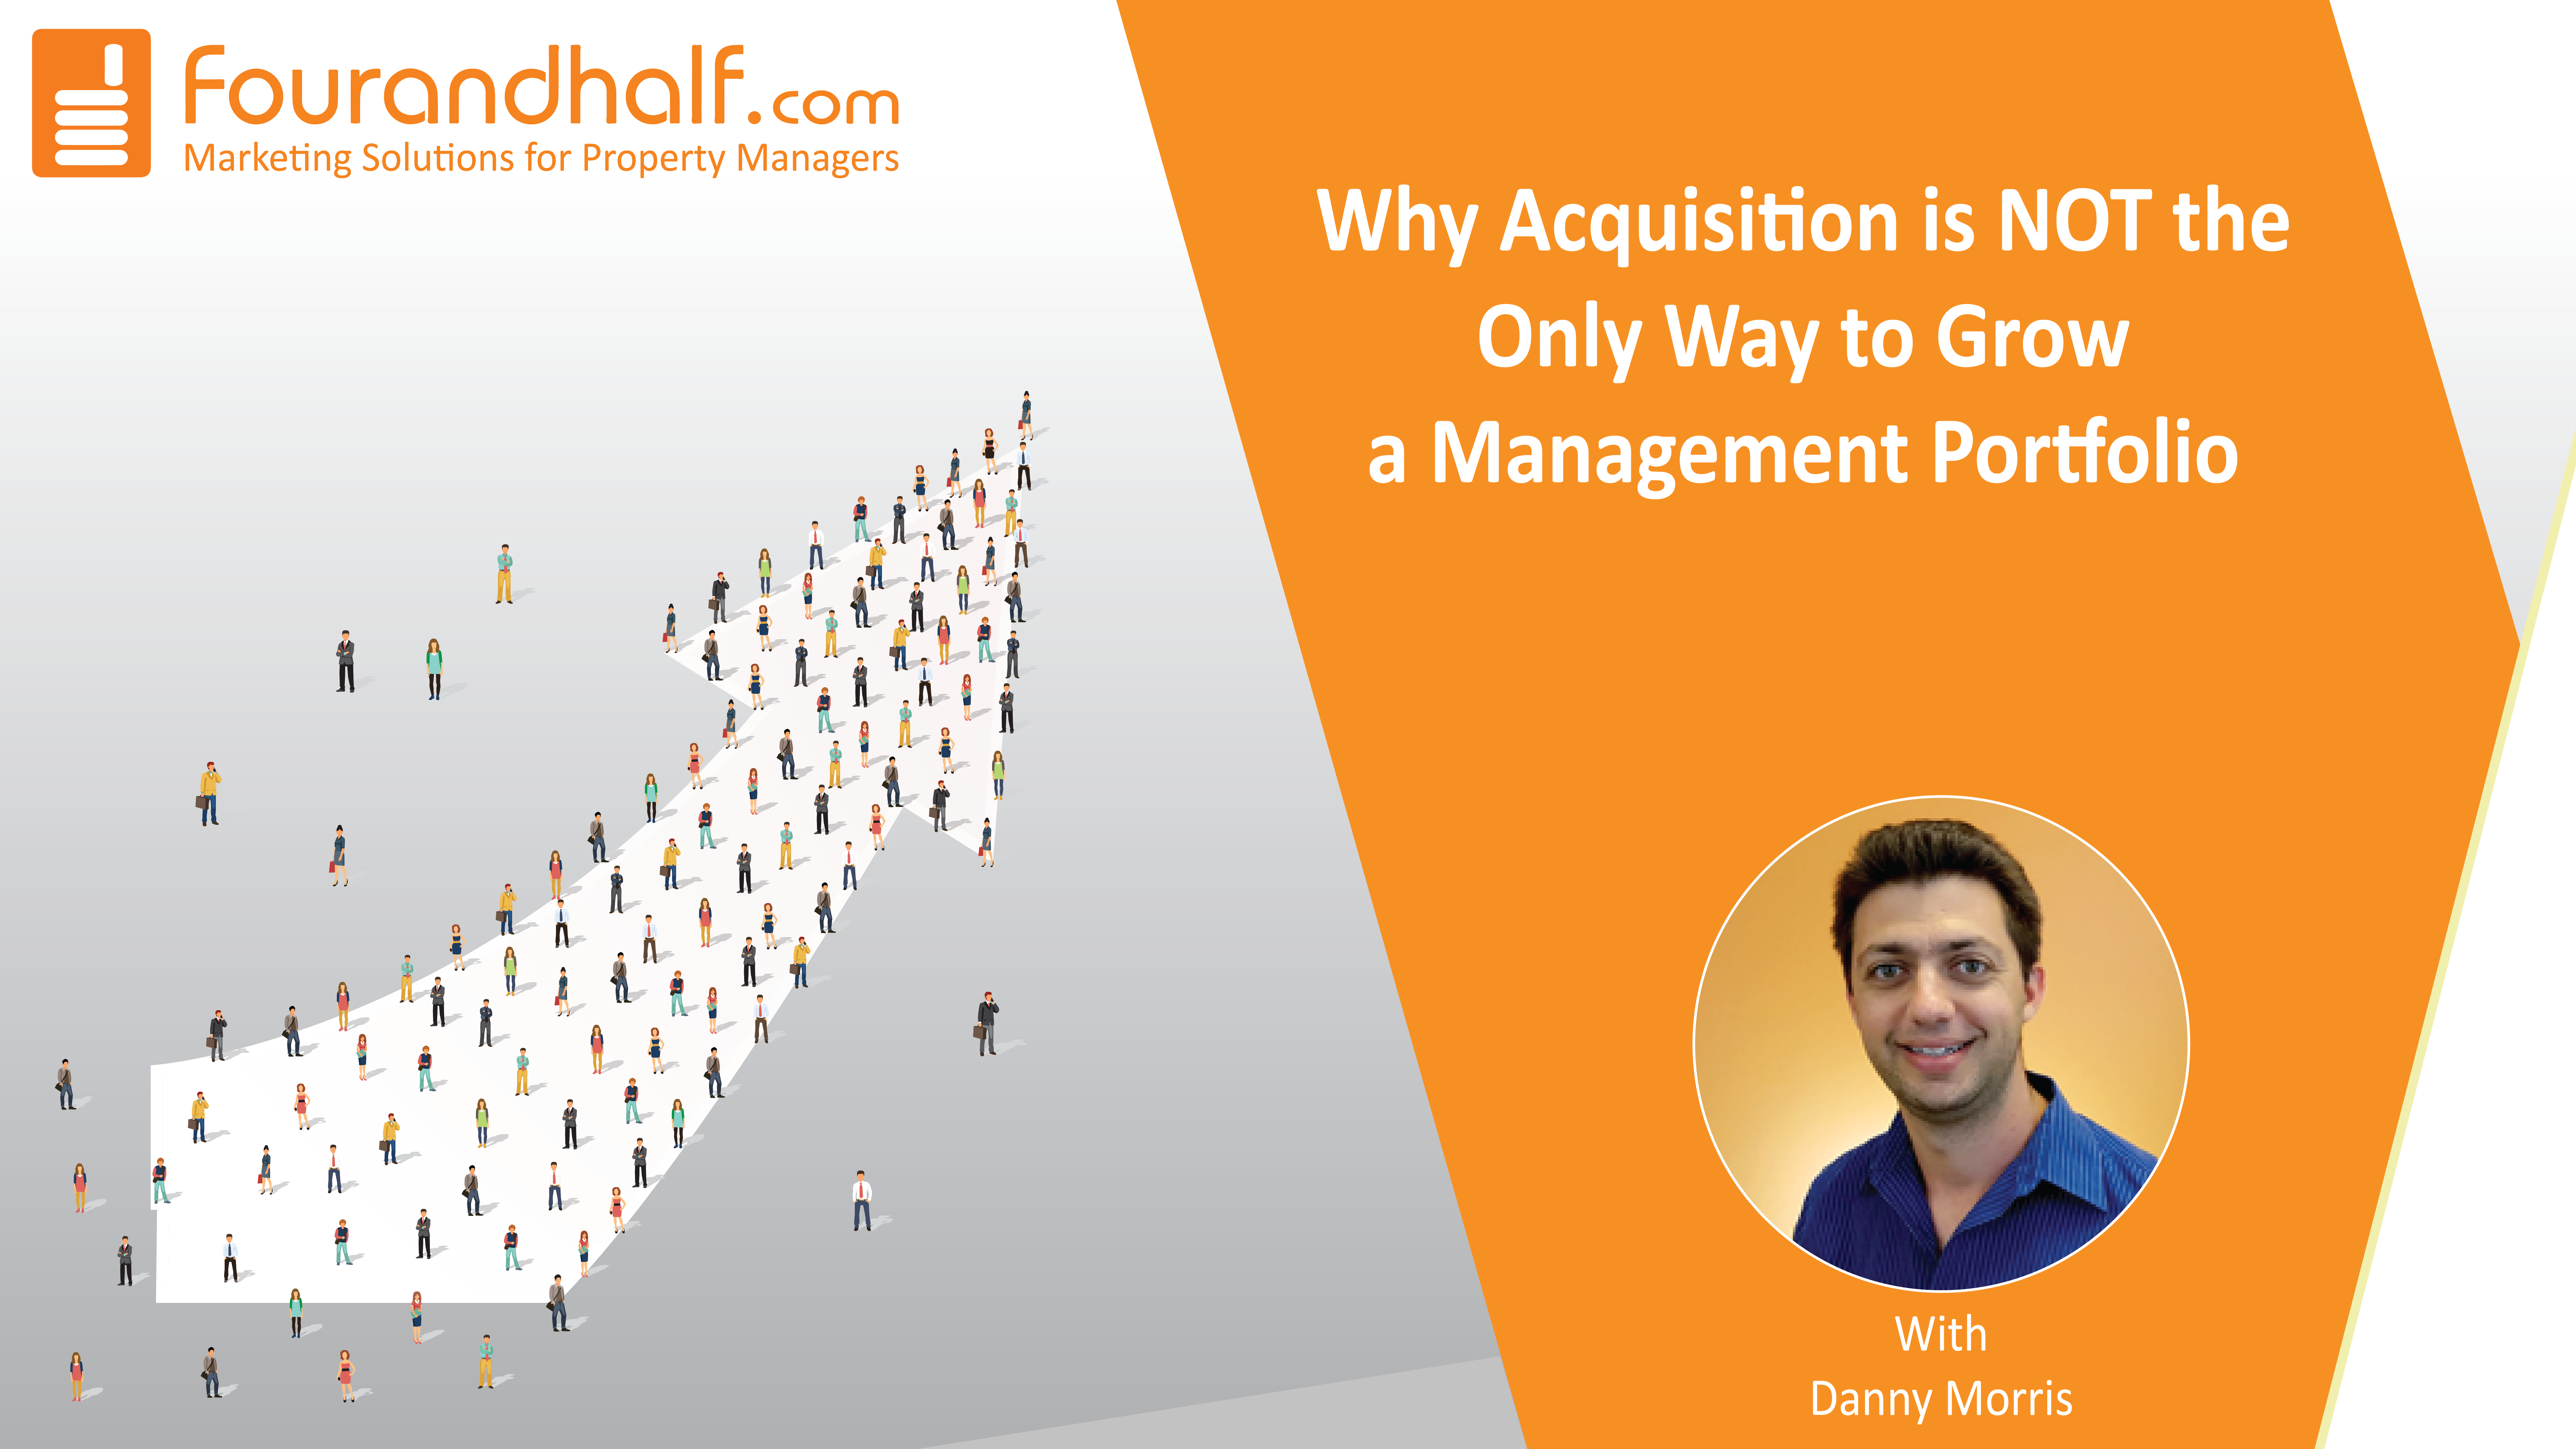 Why Acquisition is NOT the Only Way to Grow a Management Portfolio